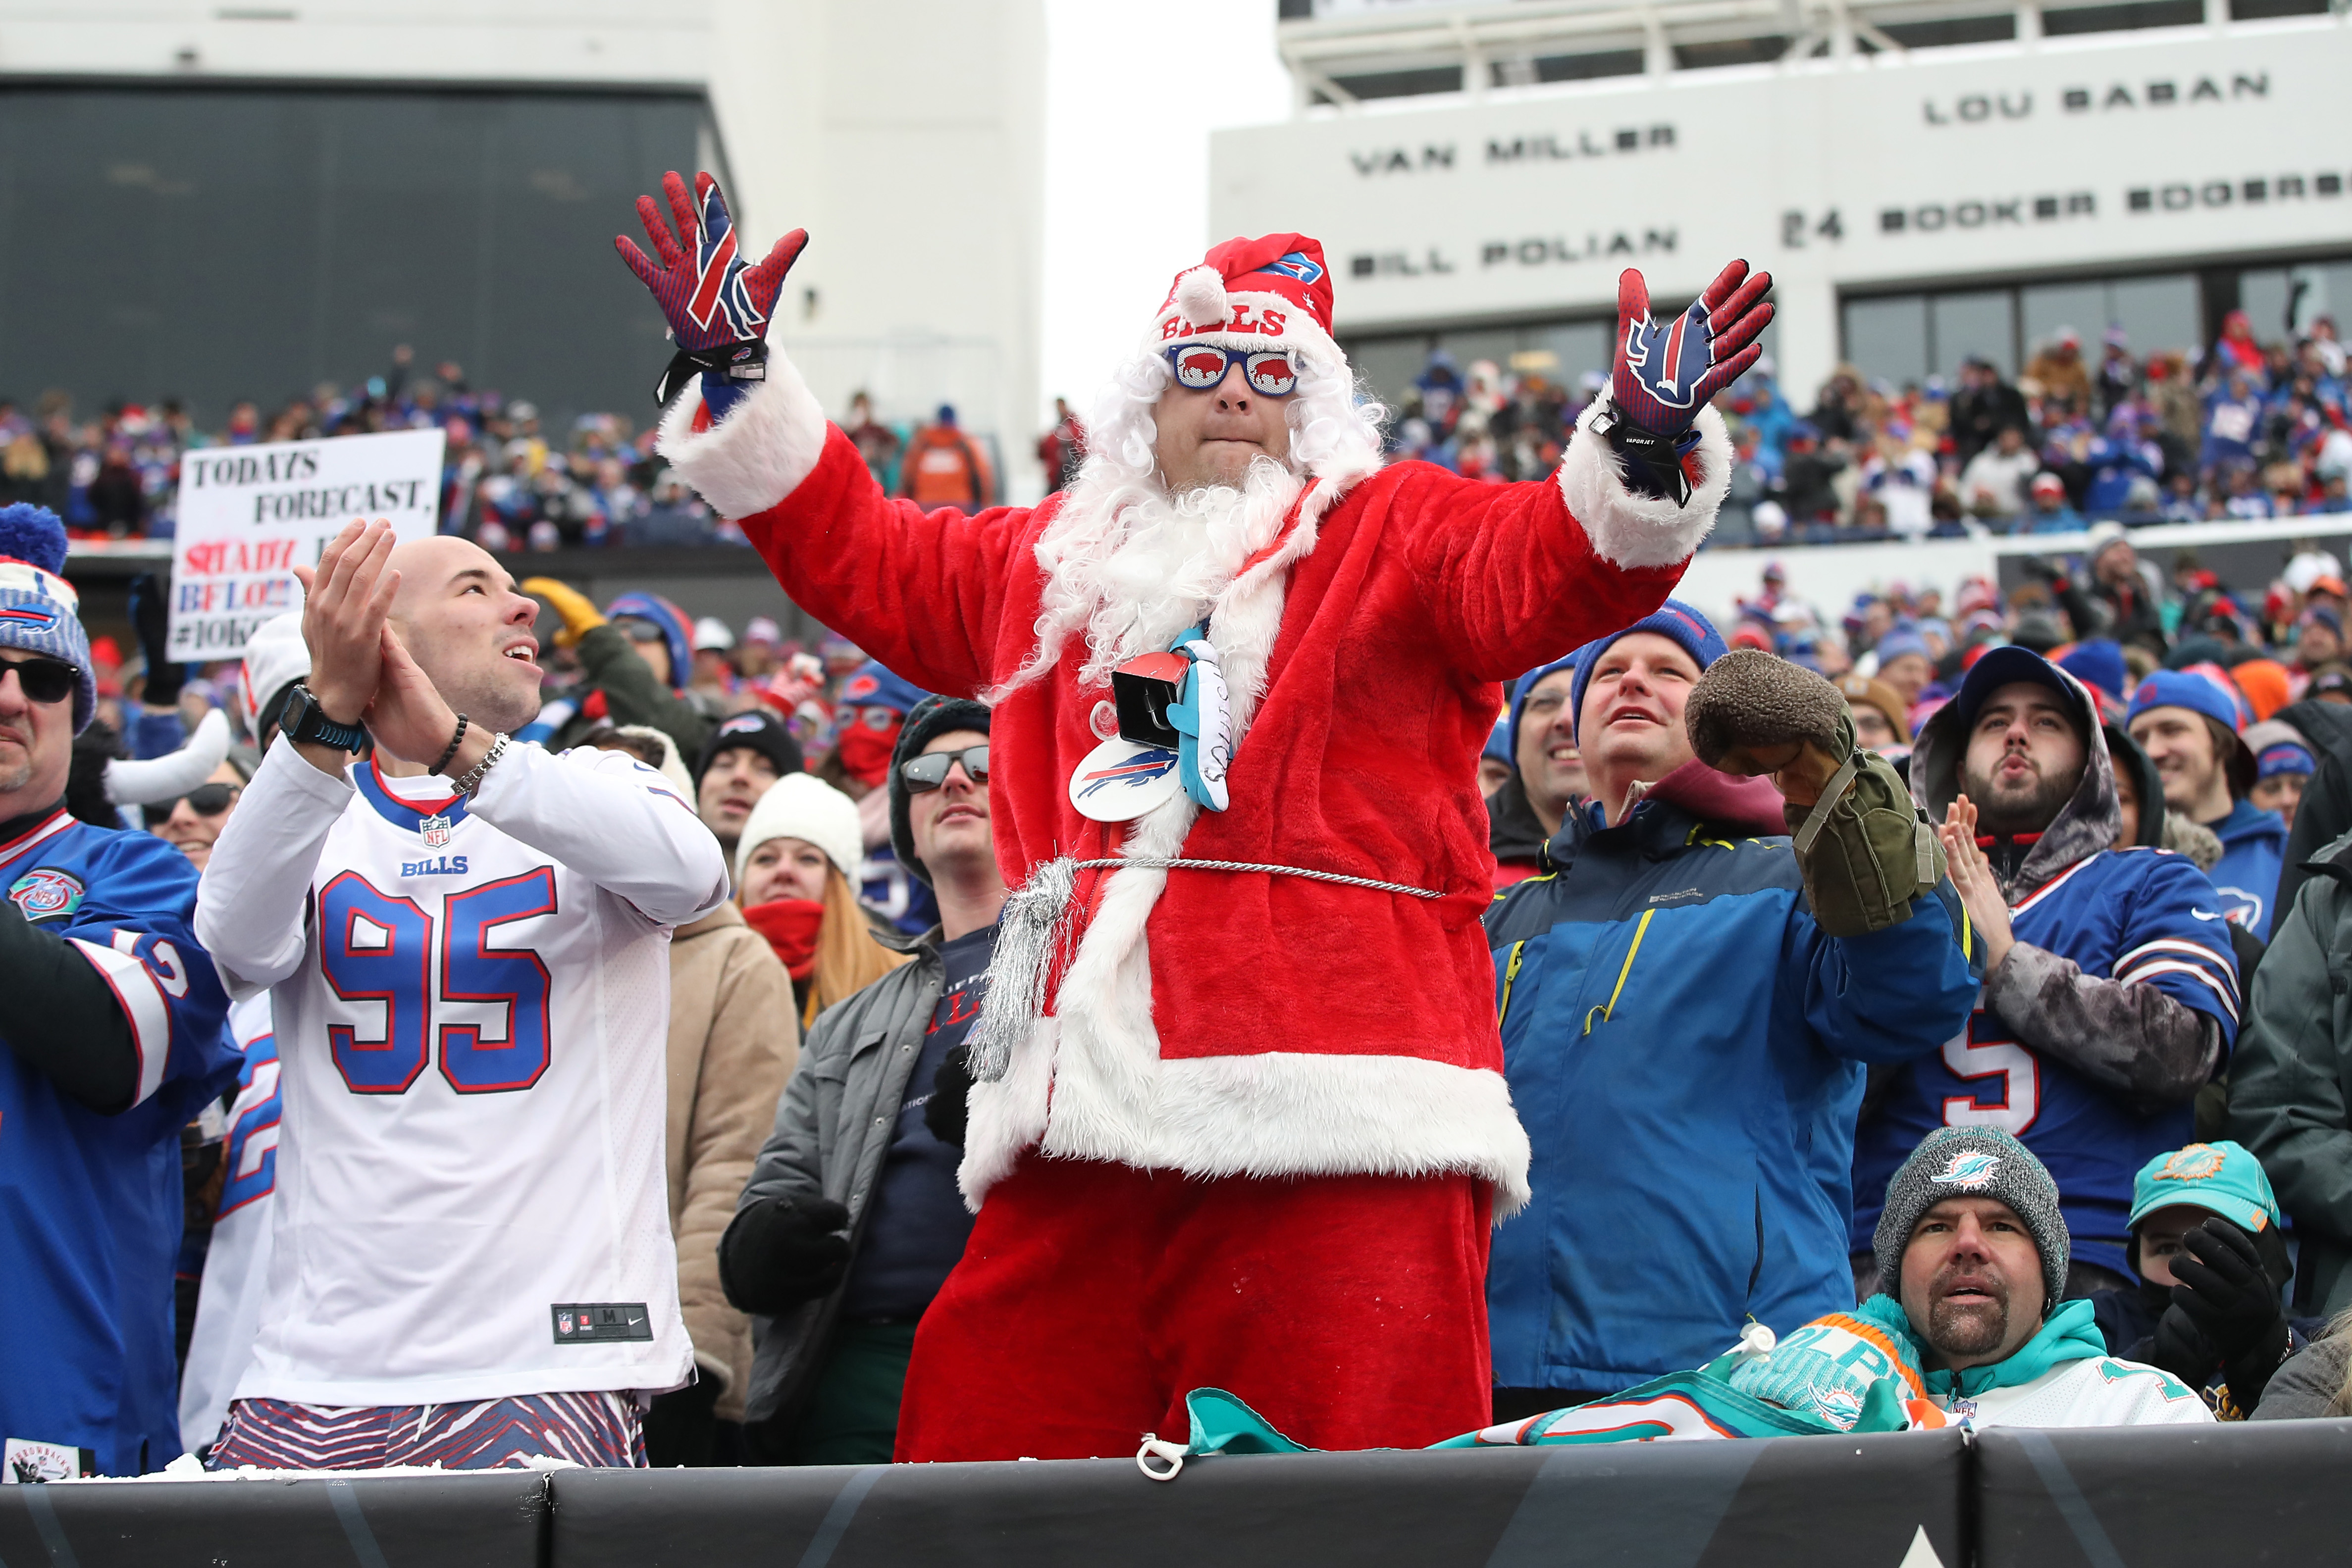 nfl games christmas day 2022